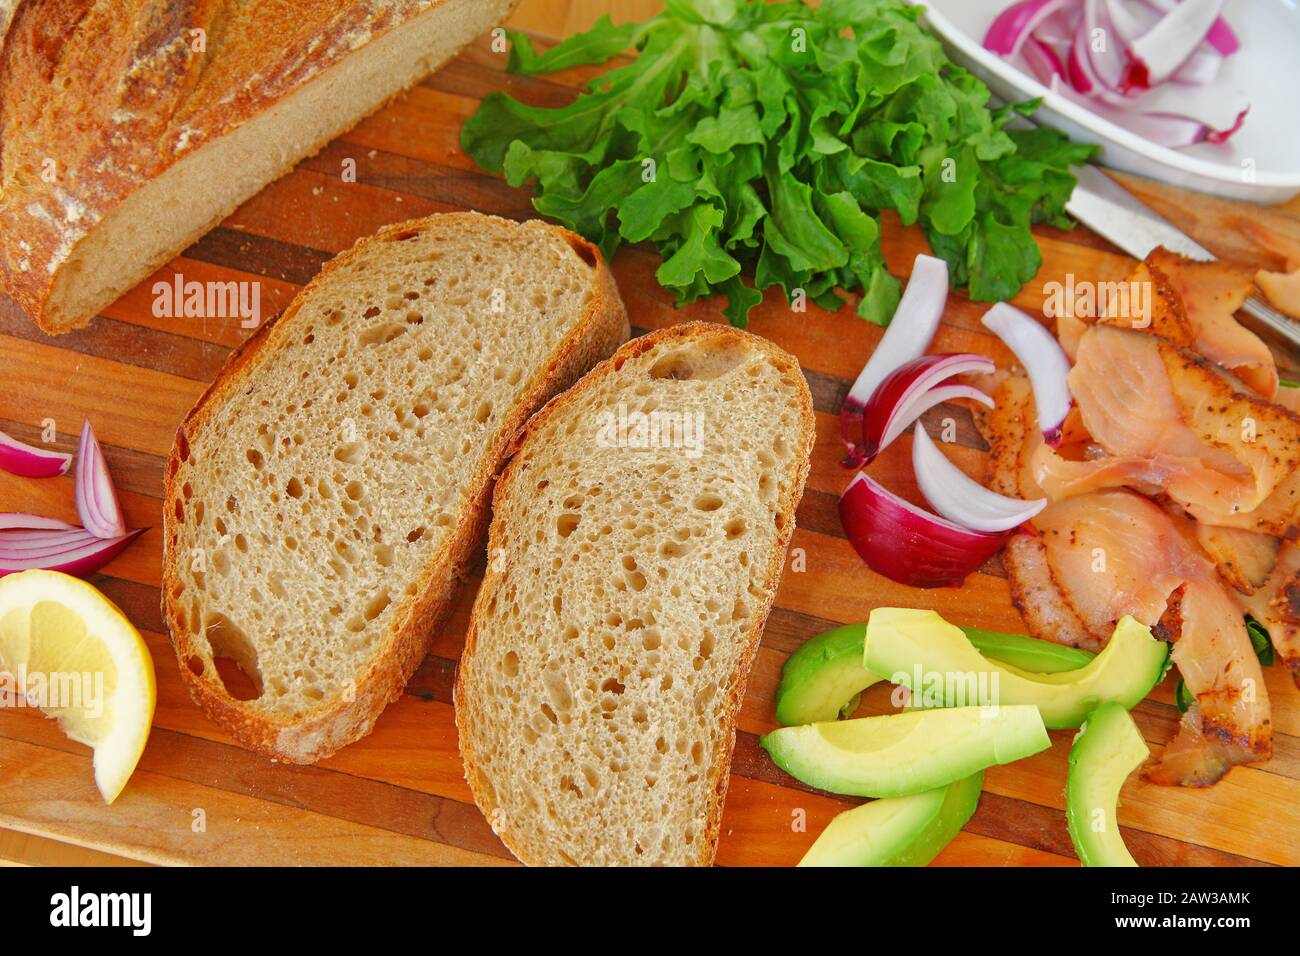 Making a smoked salmon sandwich with lettuce, onion and avocado on artisan bread Stock Photo